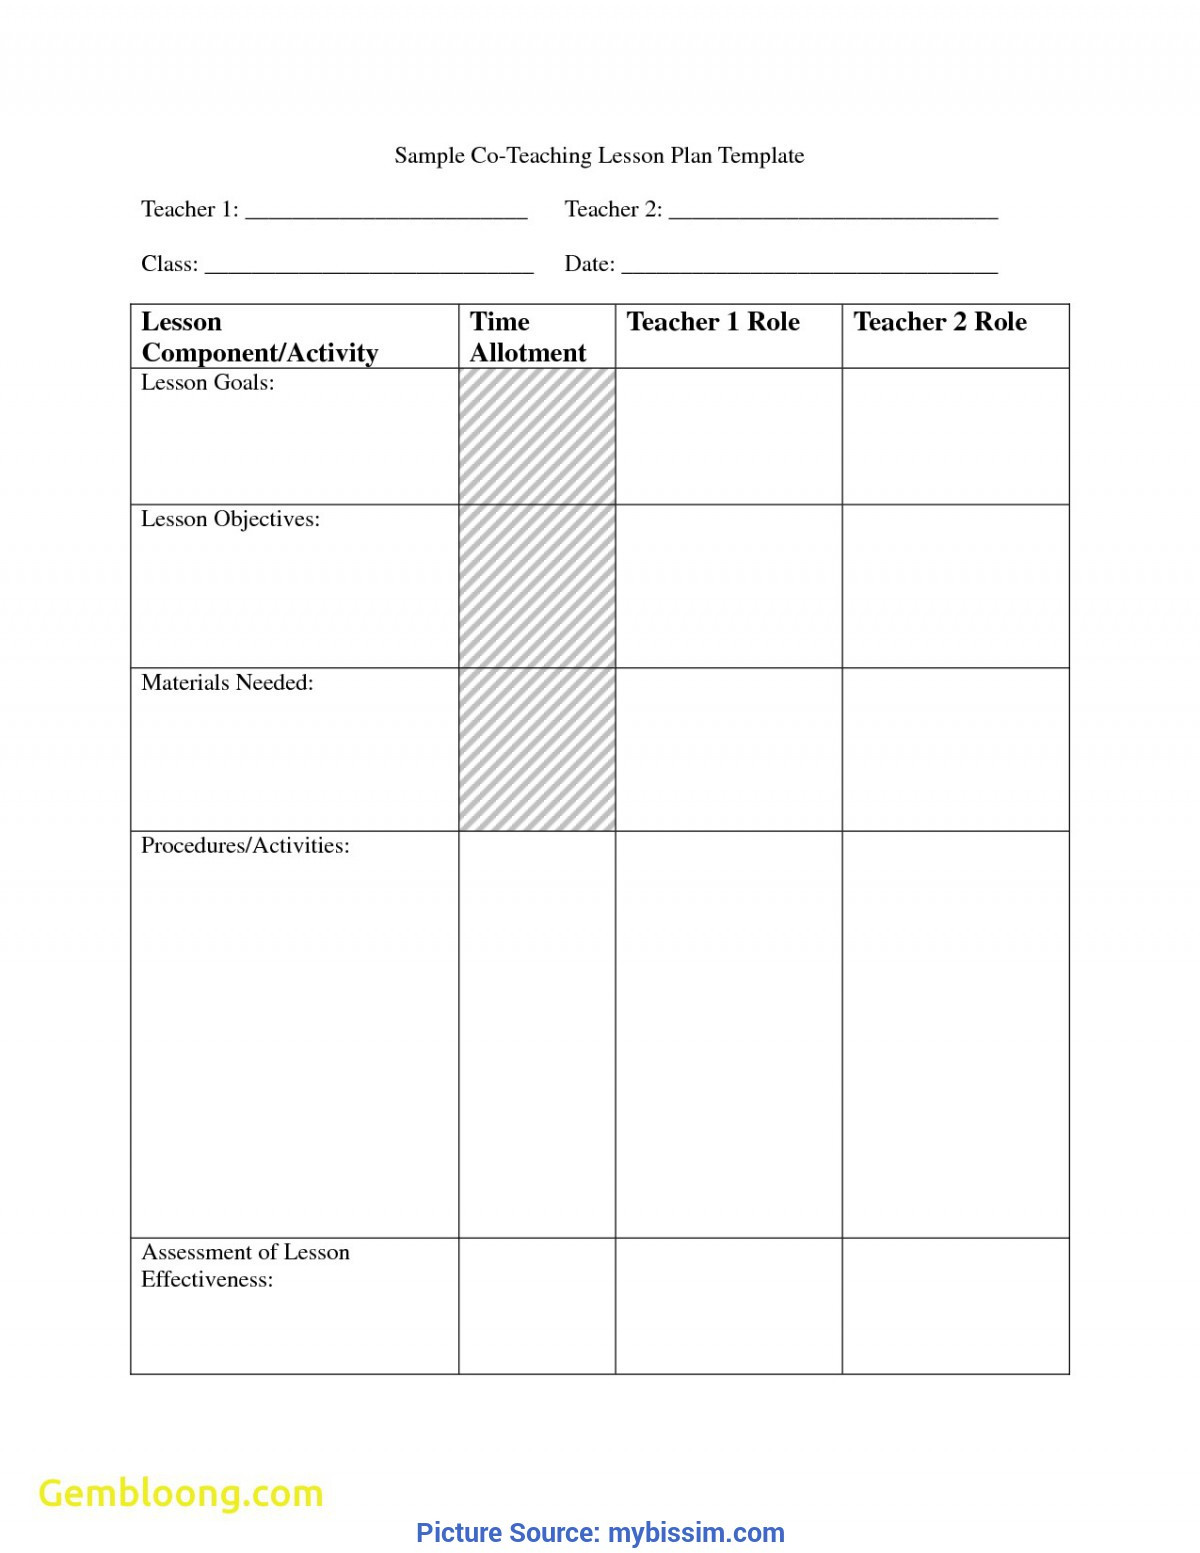 Small Group Lesson Plan Template Trending Aquaculture Lesson Plans Students Perceptions